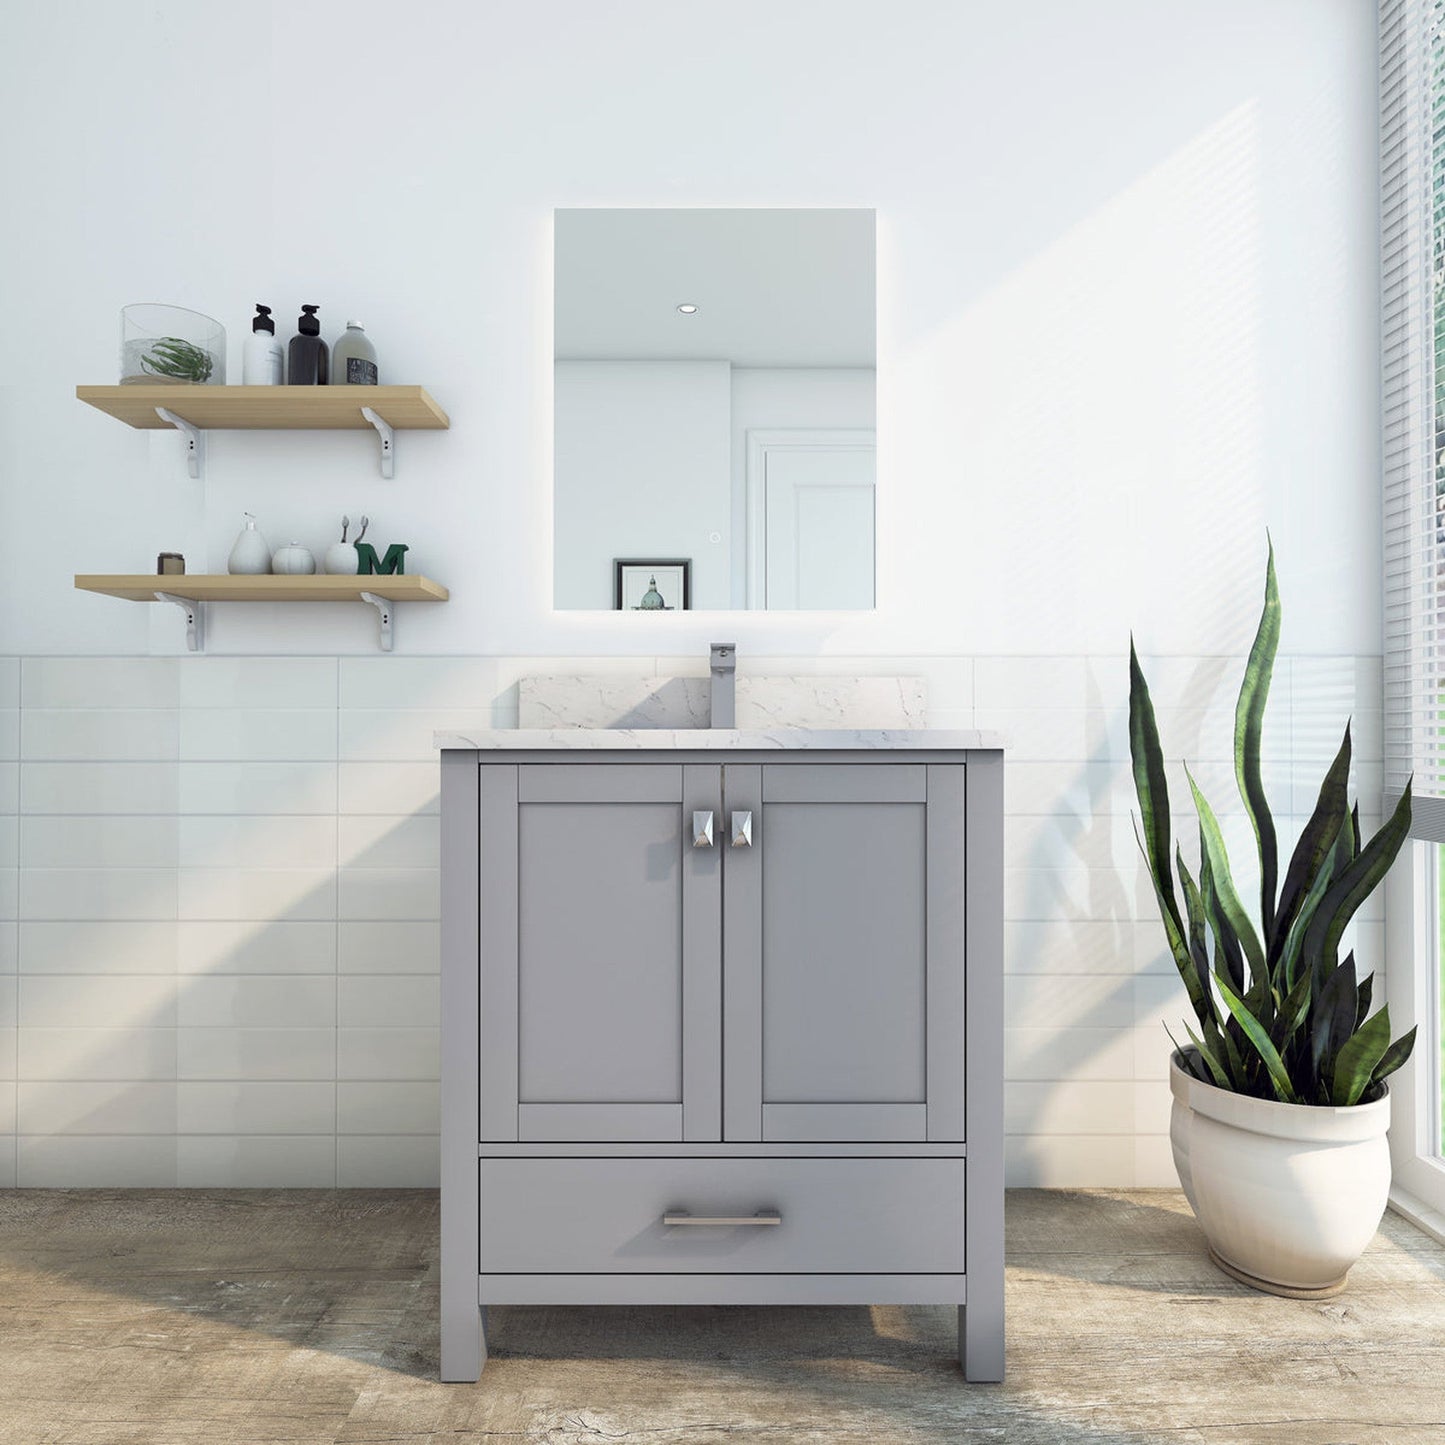 Duko Roma 30" With White Cararra Marble Tabletop, Rectangular Single Basin and Drawer Cabinet Gray Wooden Vanity Set